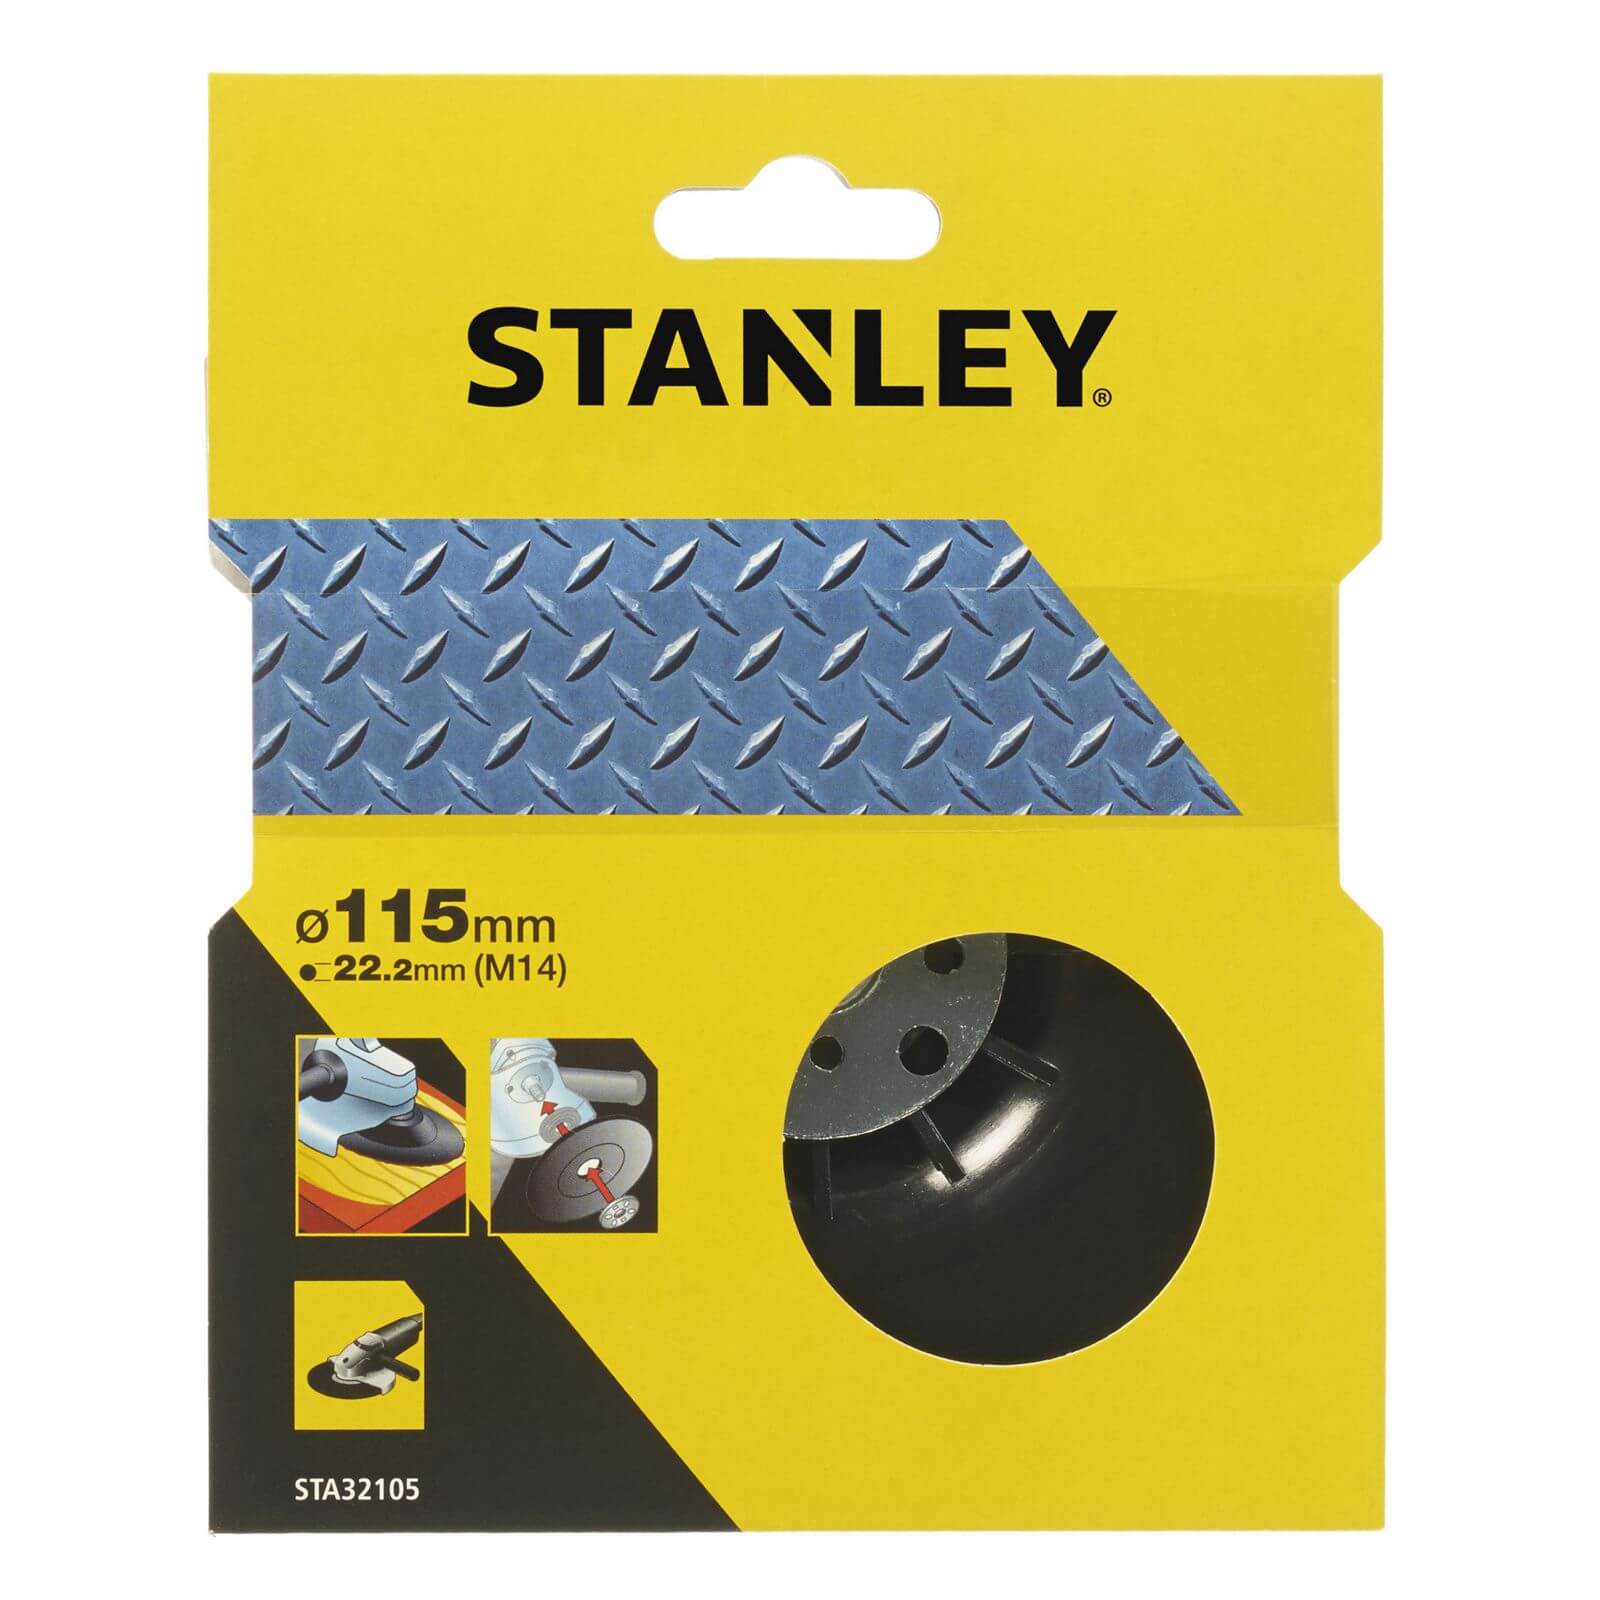 Stanley 115mm Angle Grinder Backing Pad - STA32105-XJ